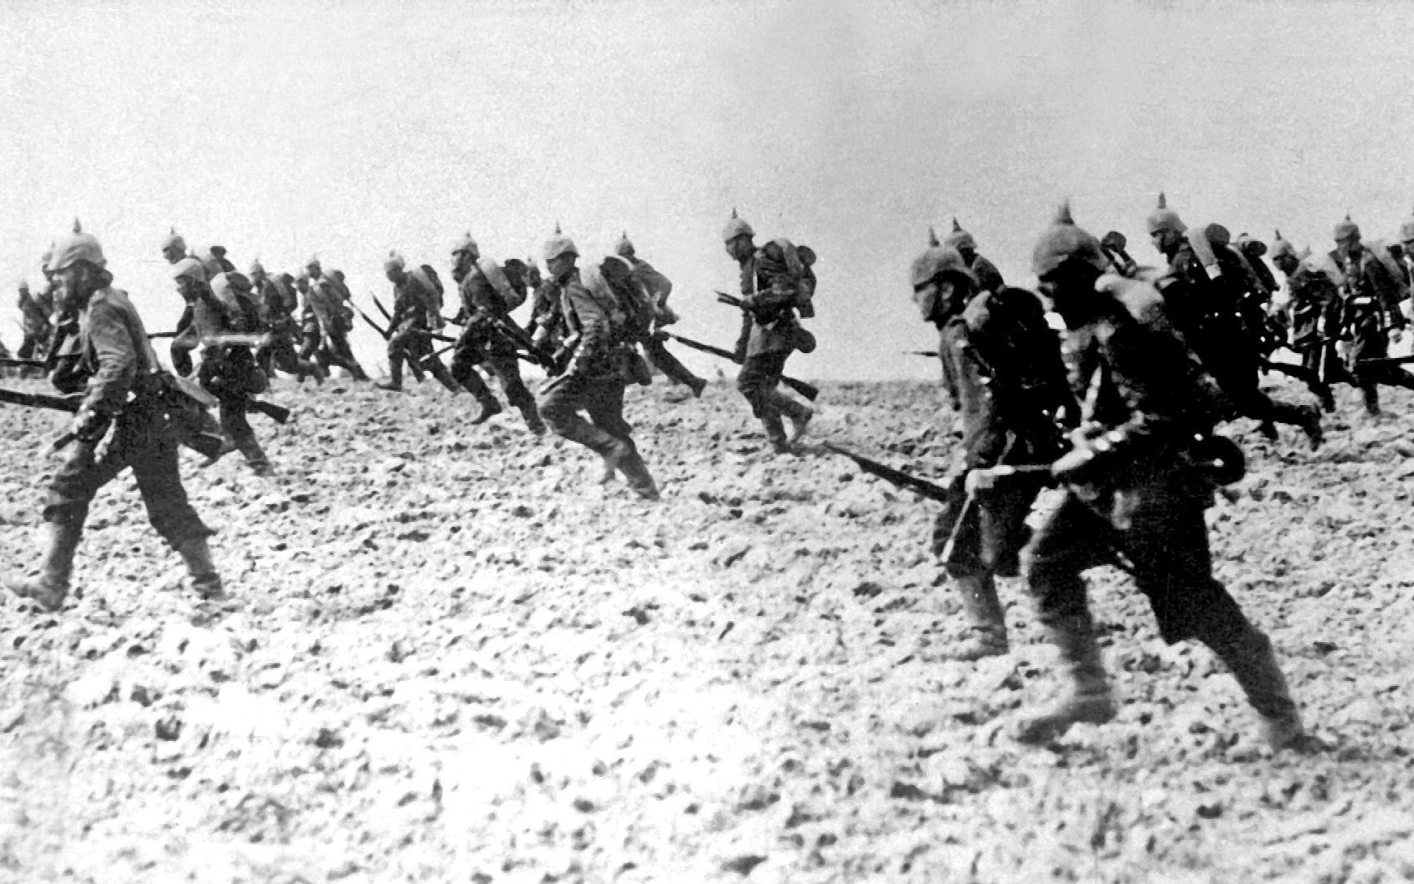 Why did Soldiers Fight in World War I?